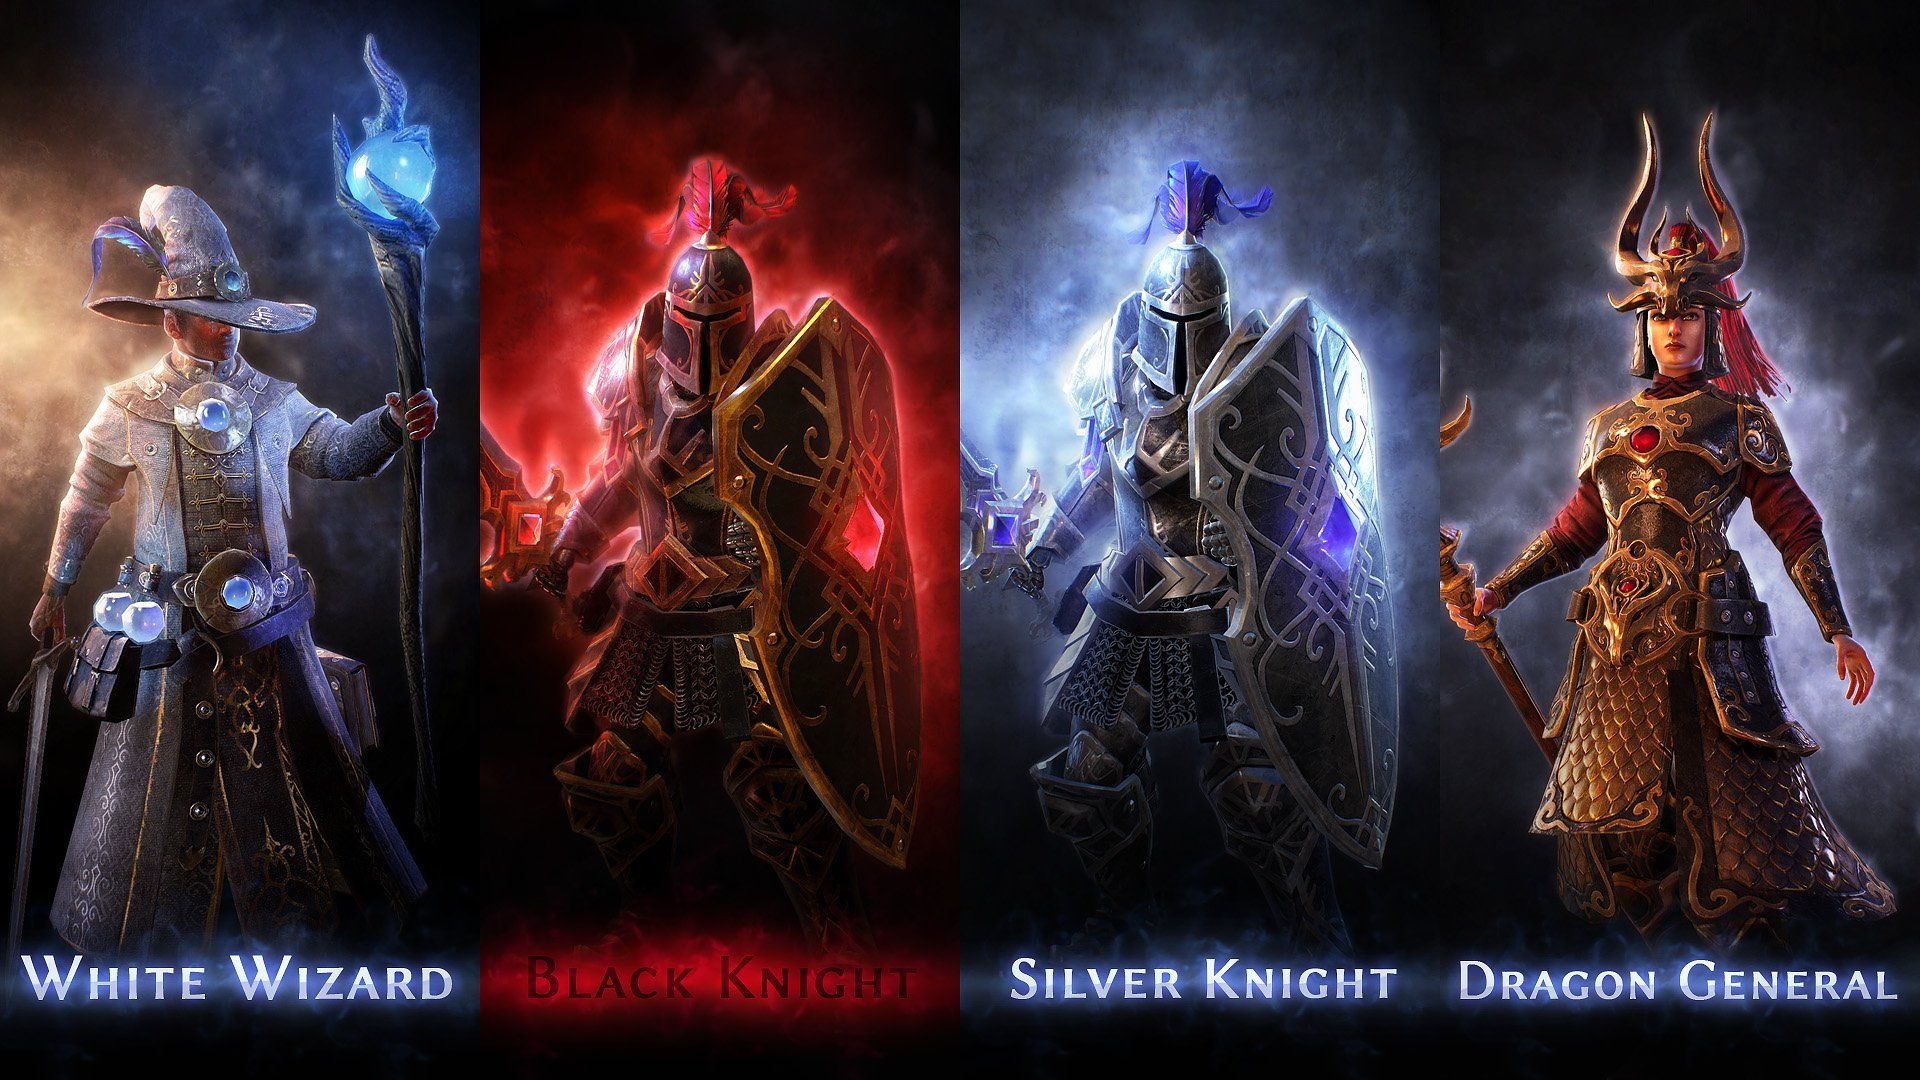 Grim Dawn: White Wizard, Black Knight, Silver Knight, Dragon General, The playable characters in a video game. 1920x1080 Full HD Background.